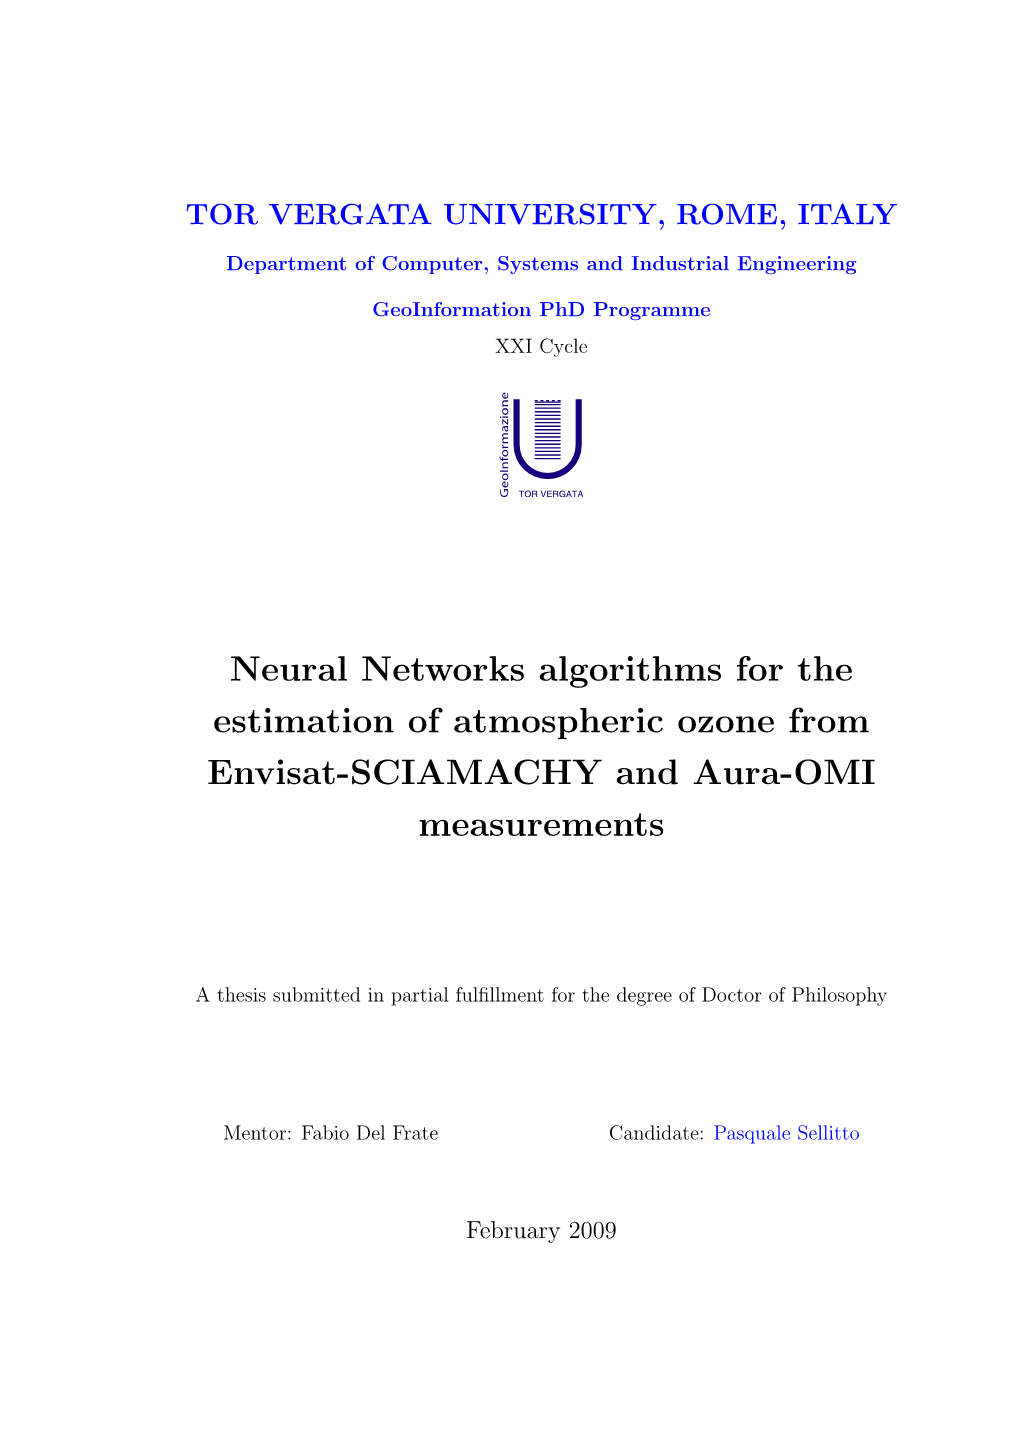 Neural Networks Algorithms for the Estimation of Atmospheric Ozone from Envisat-SCIAMACHY and Aura-OMI Measurements